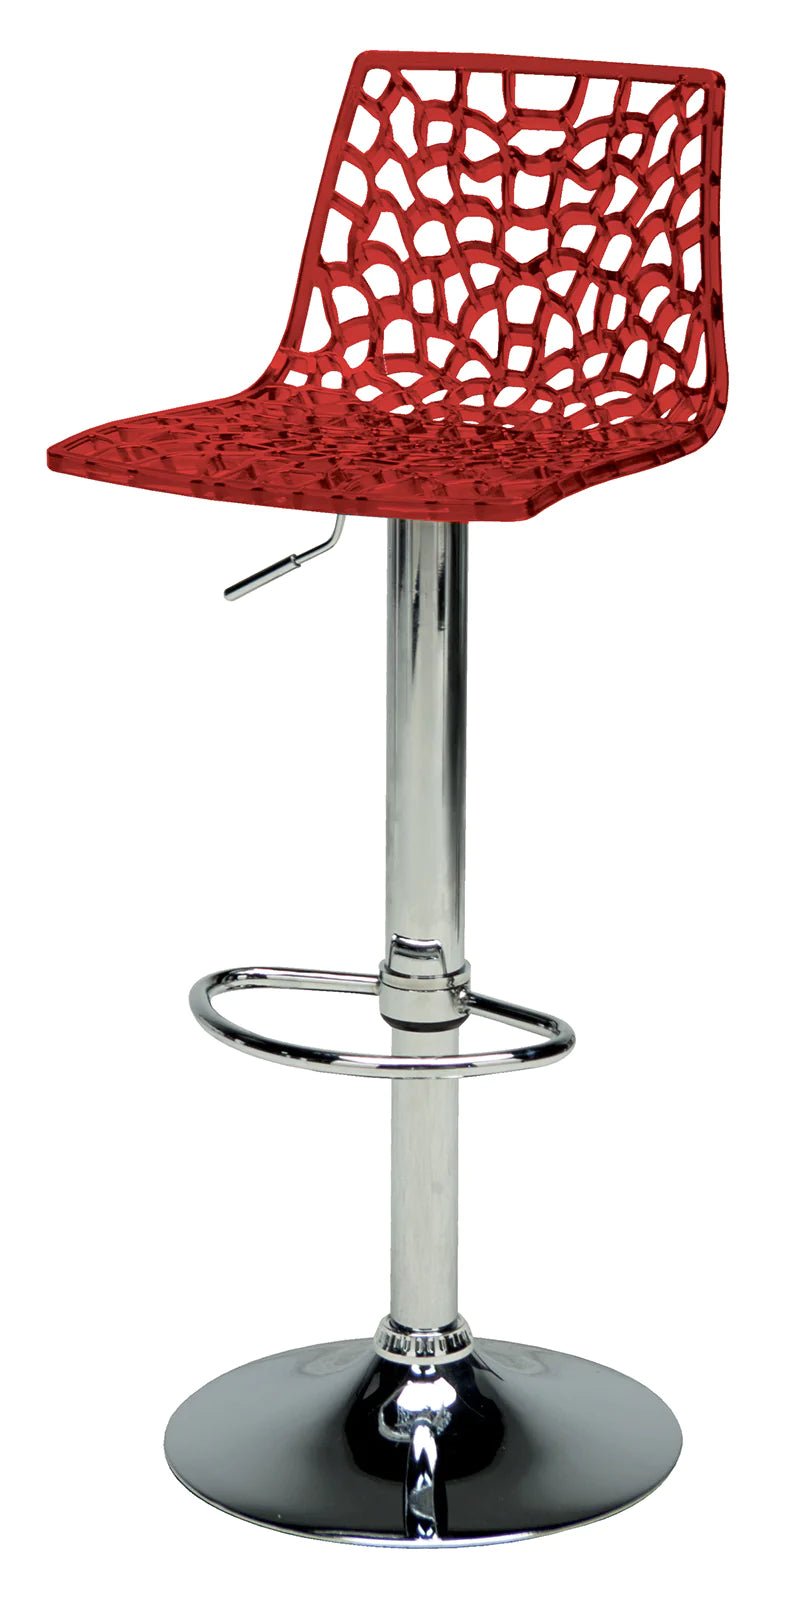 Does the amount of wine you drank affect the color of this Bordeaux red translucent adjustable bar stool?